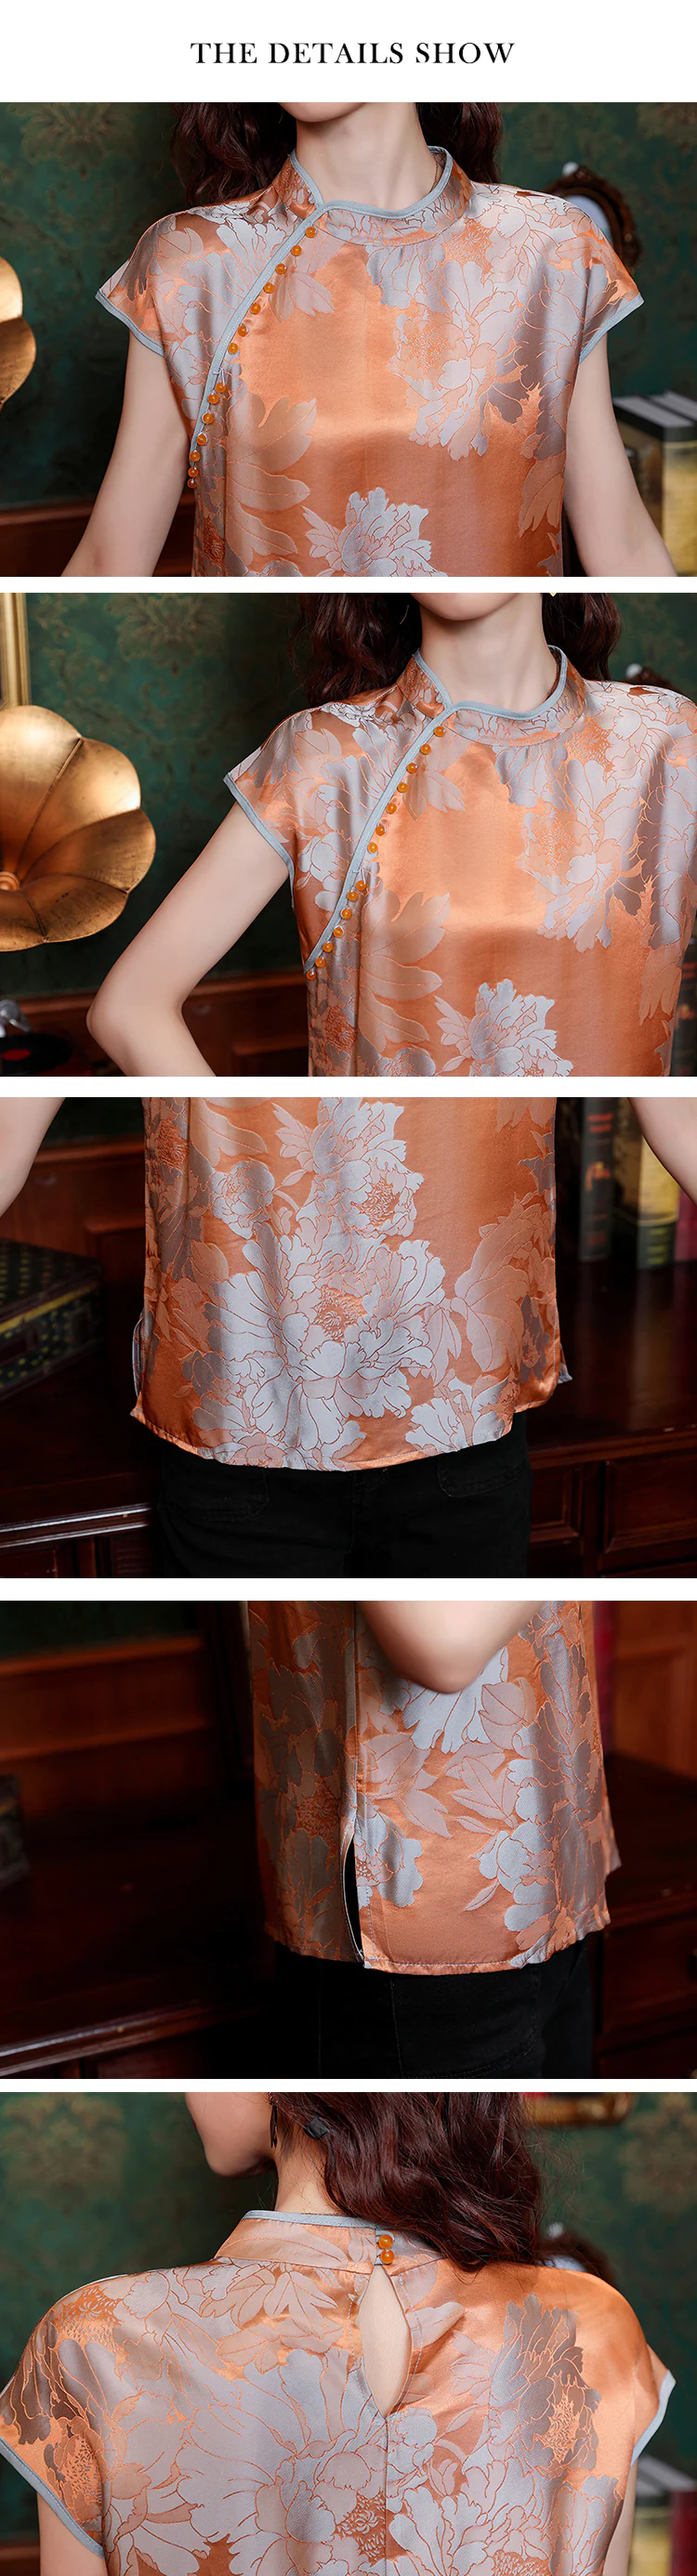 Ladies-Floral-Printed-Short-Sleeve-Summer-Lace-Satin-Pullover-Shirt18